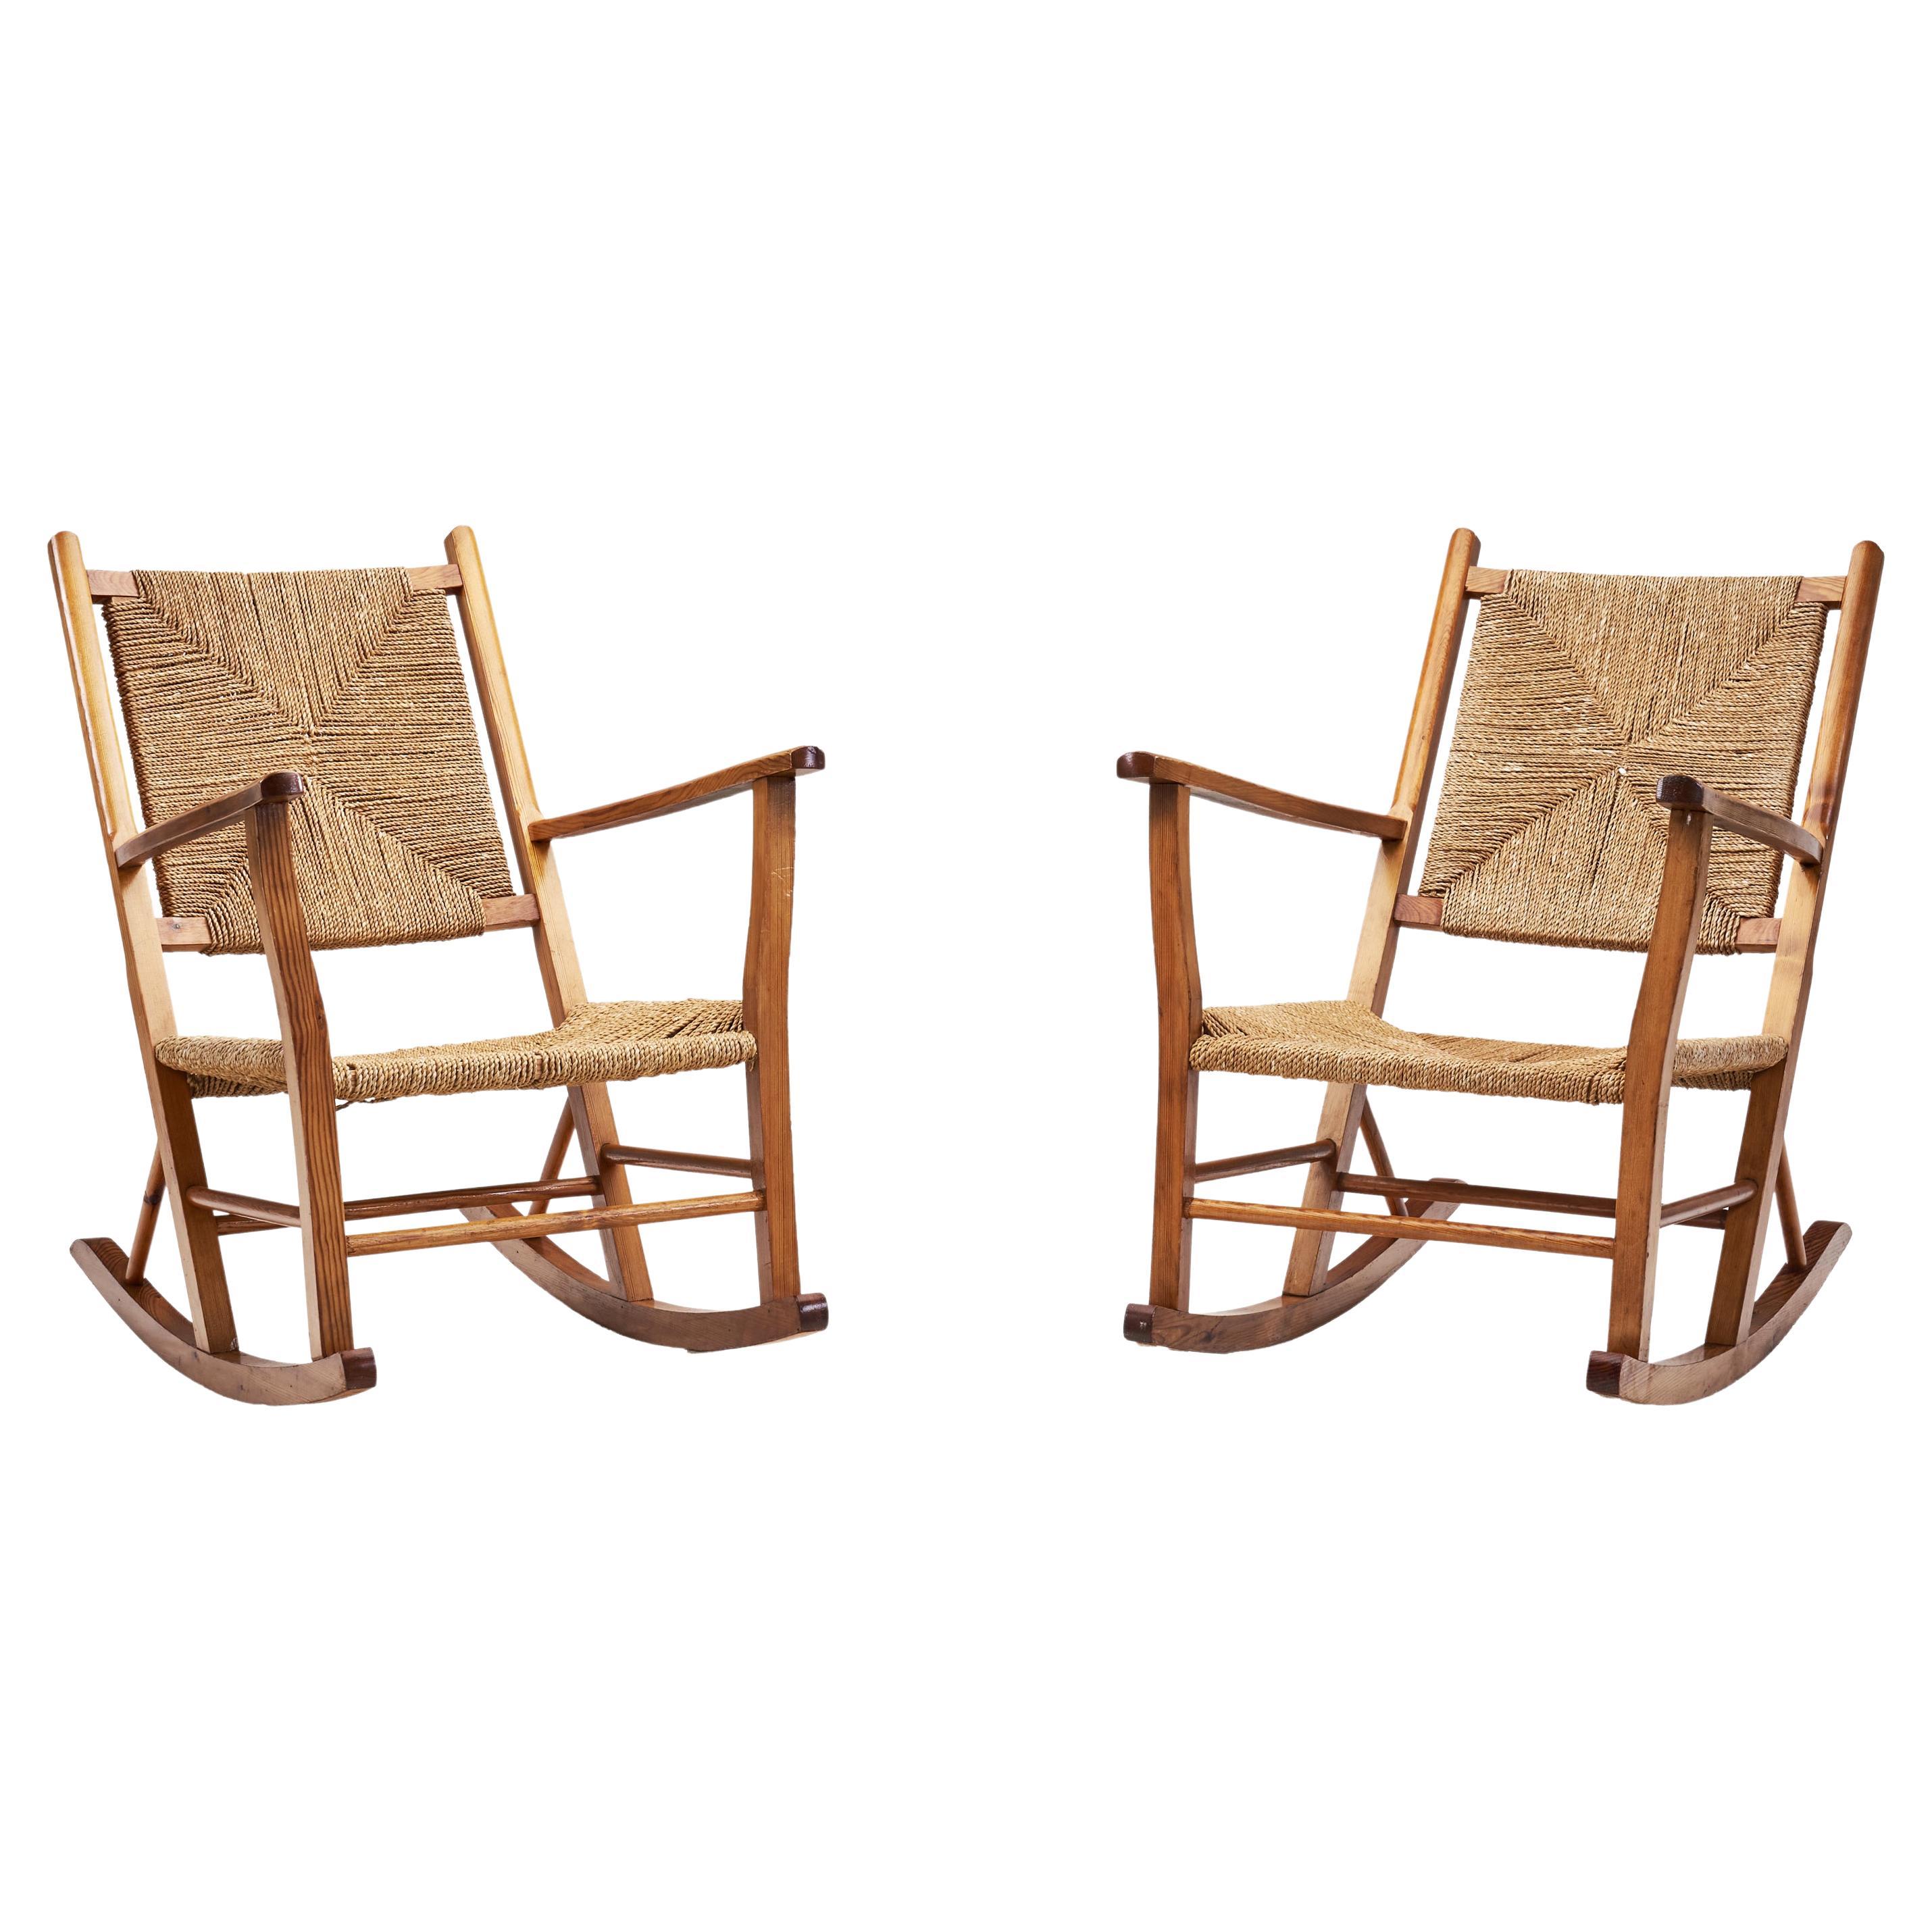 Norwegian Wood and Papercord Rocking Chairs by Slåke Møbelfabrikk, Norway 1940s For Sale